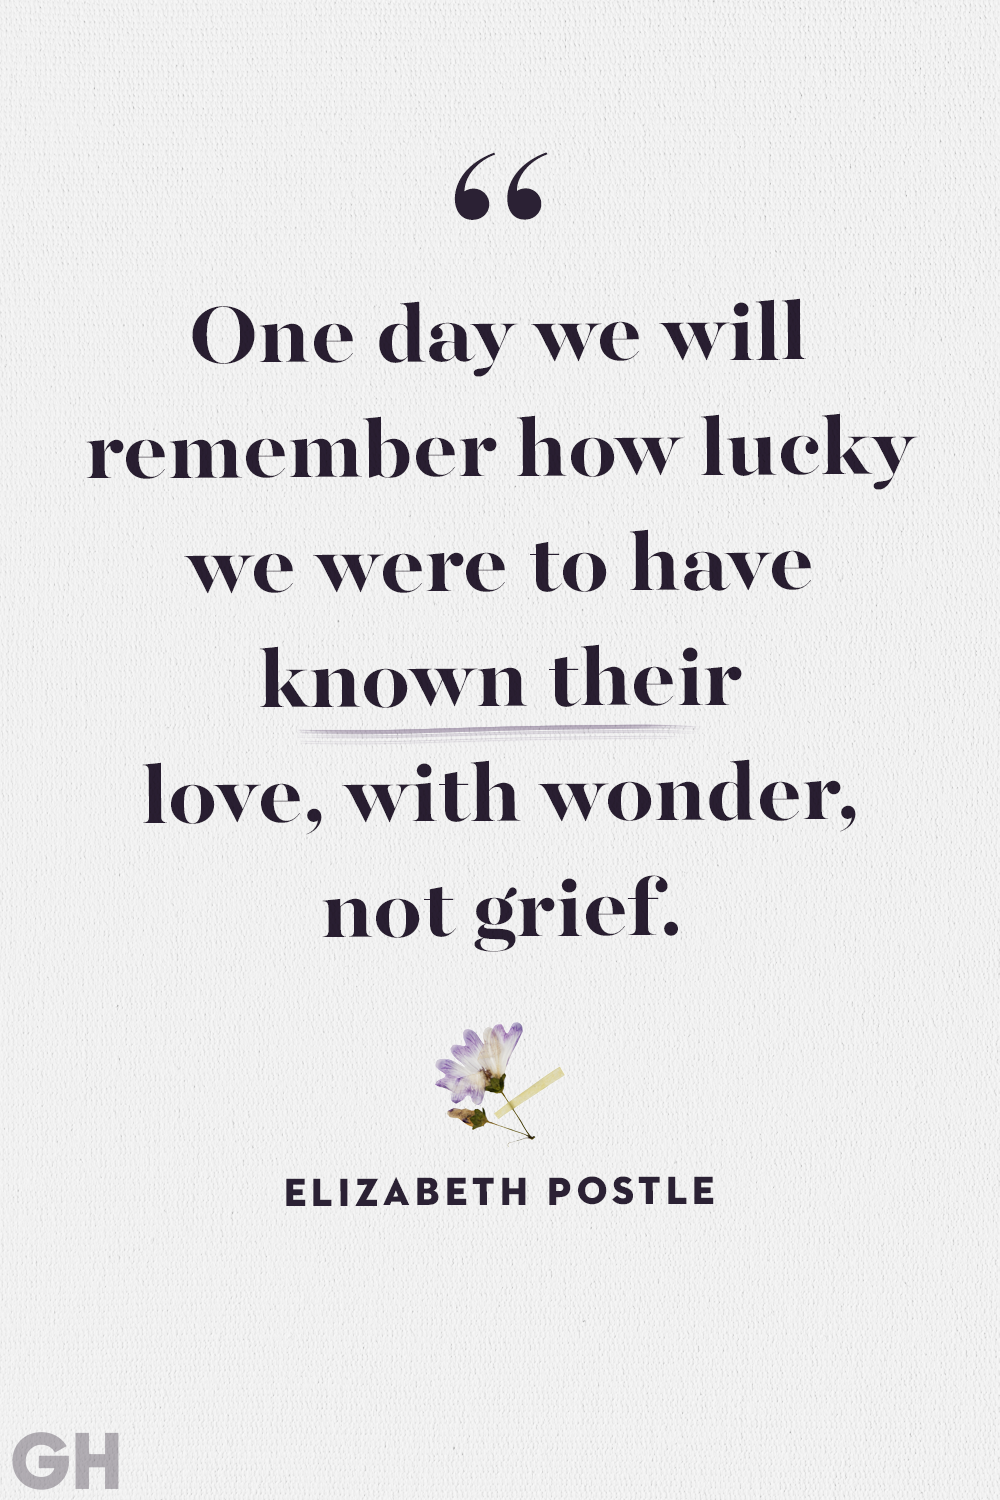 quotes about losing a loved one too soon